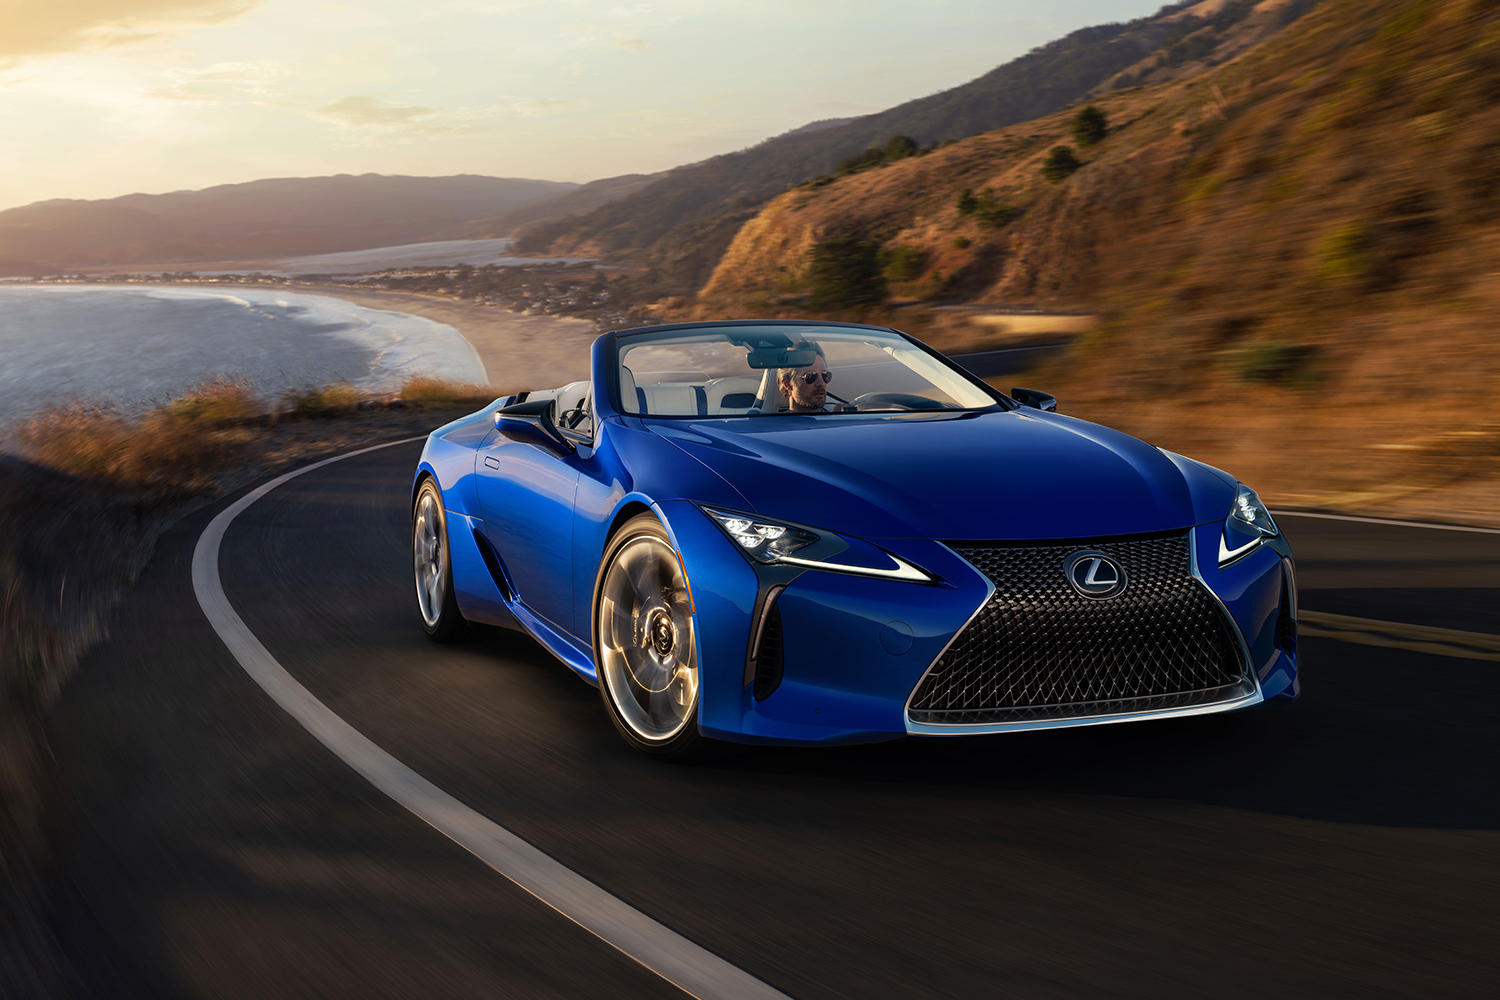 A man driving a blue 2021 Lexus LC 500 Convertible down a coastal road. The luxury grand tourer has become one of our favorites after test driving.